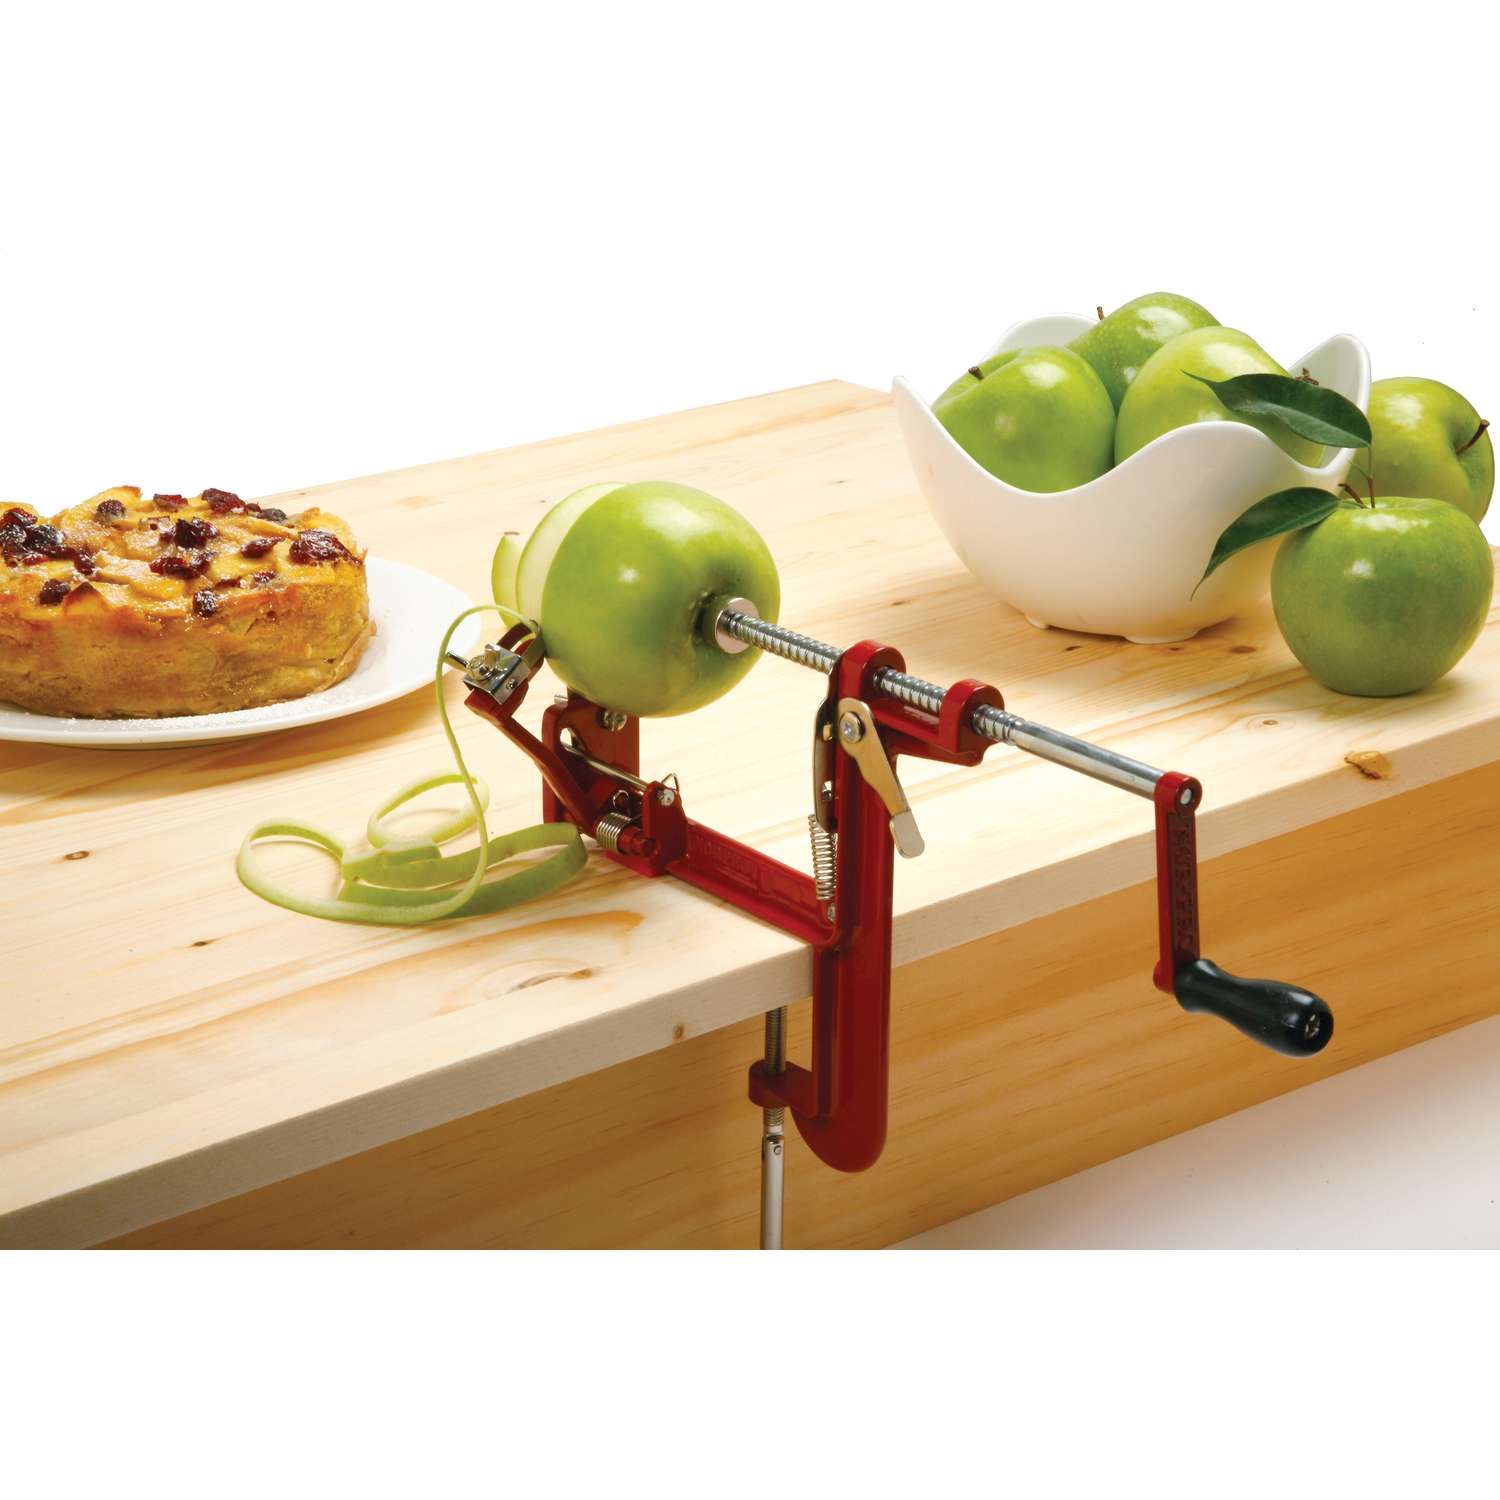 3 in 1 Apple Peeler + Corer, Slicer for FREE - Quick and Thin